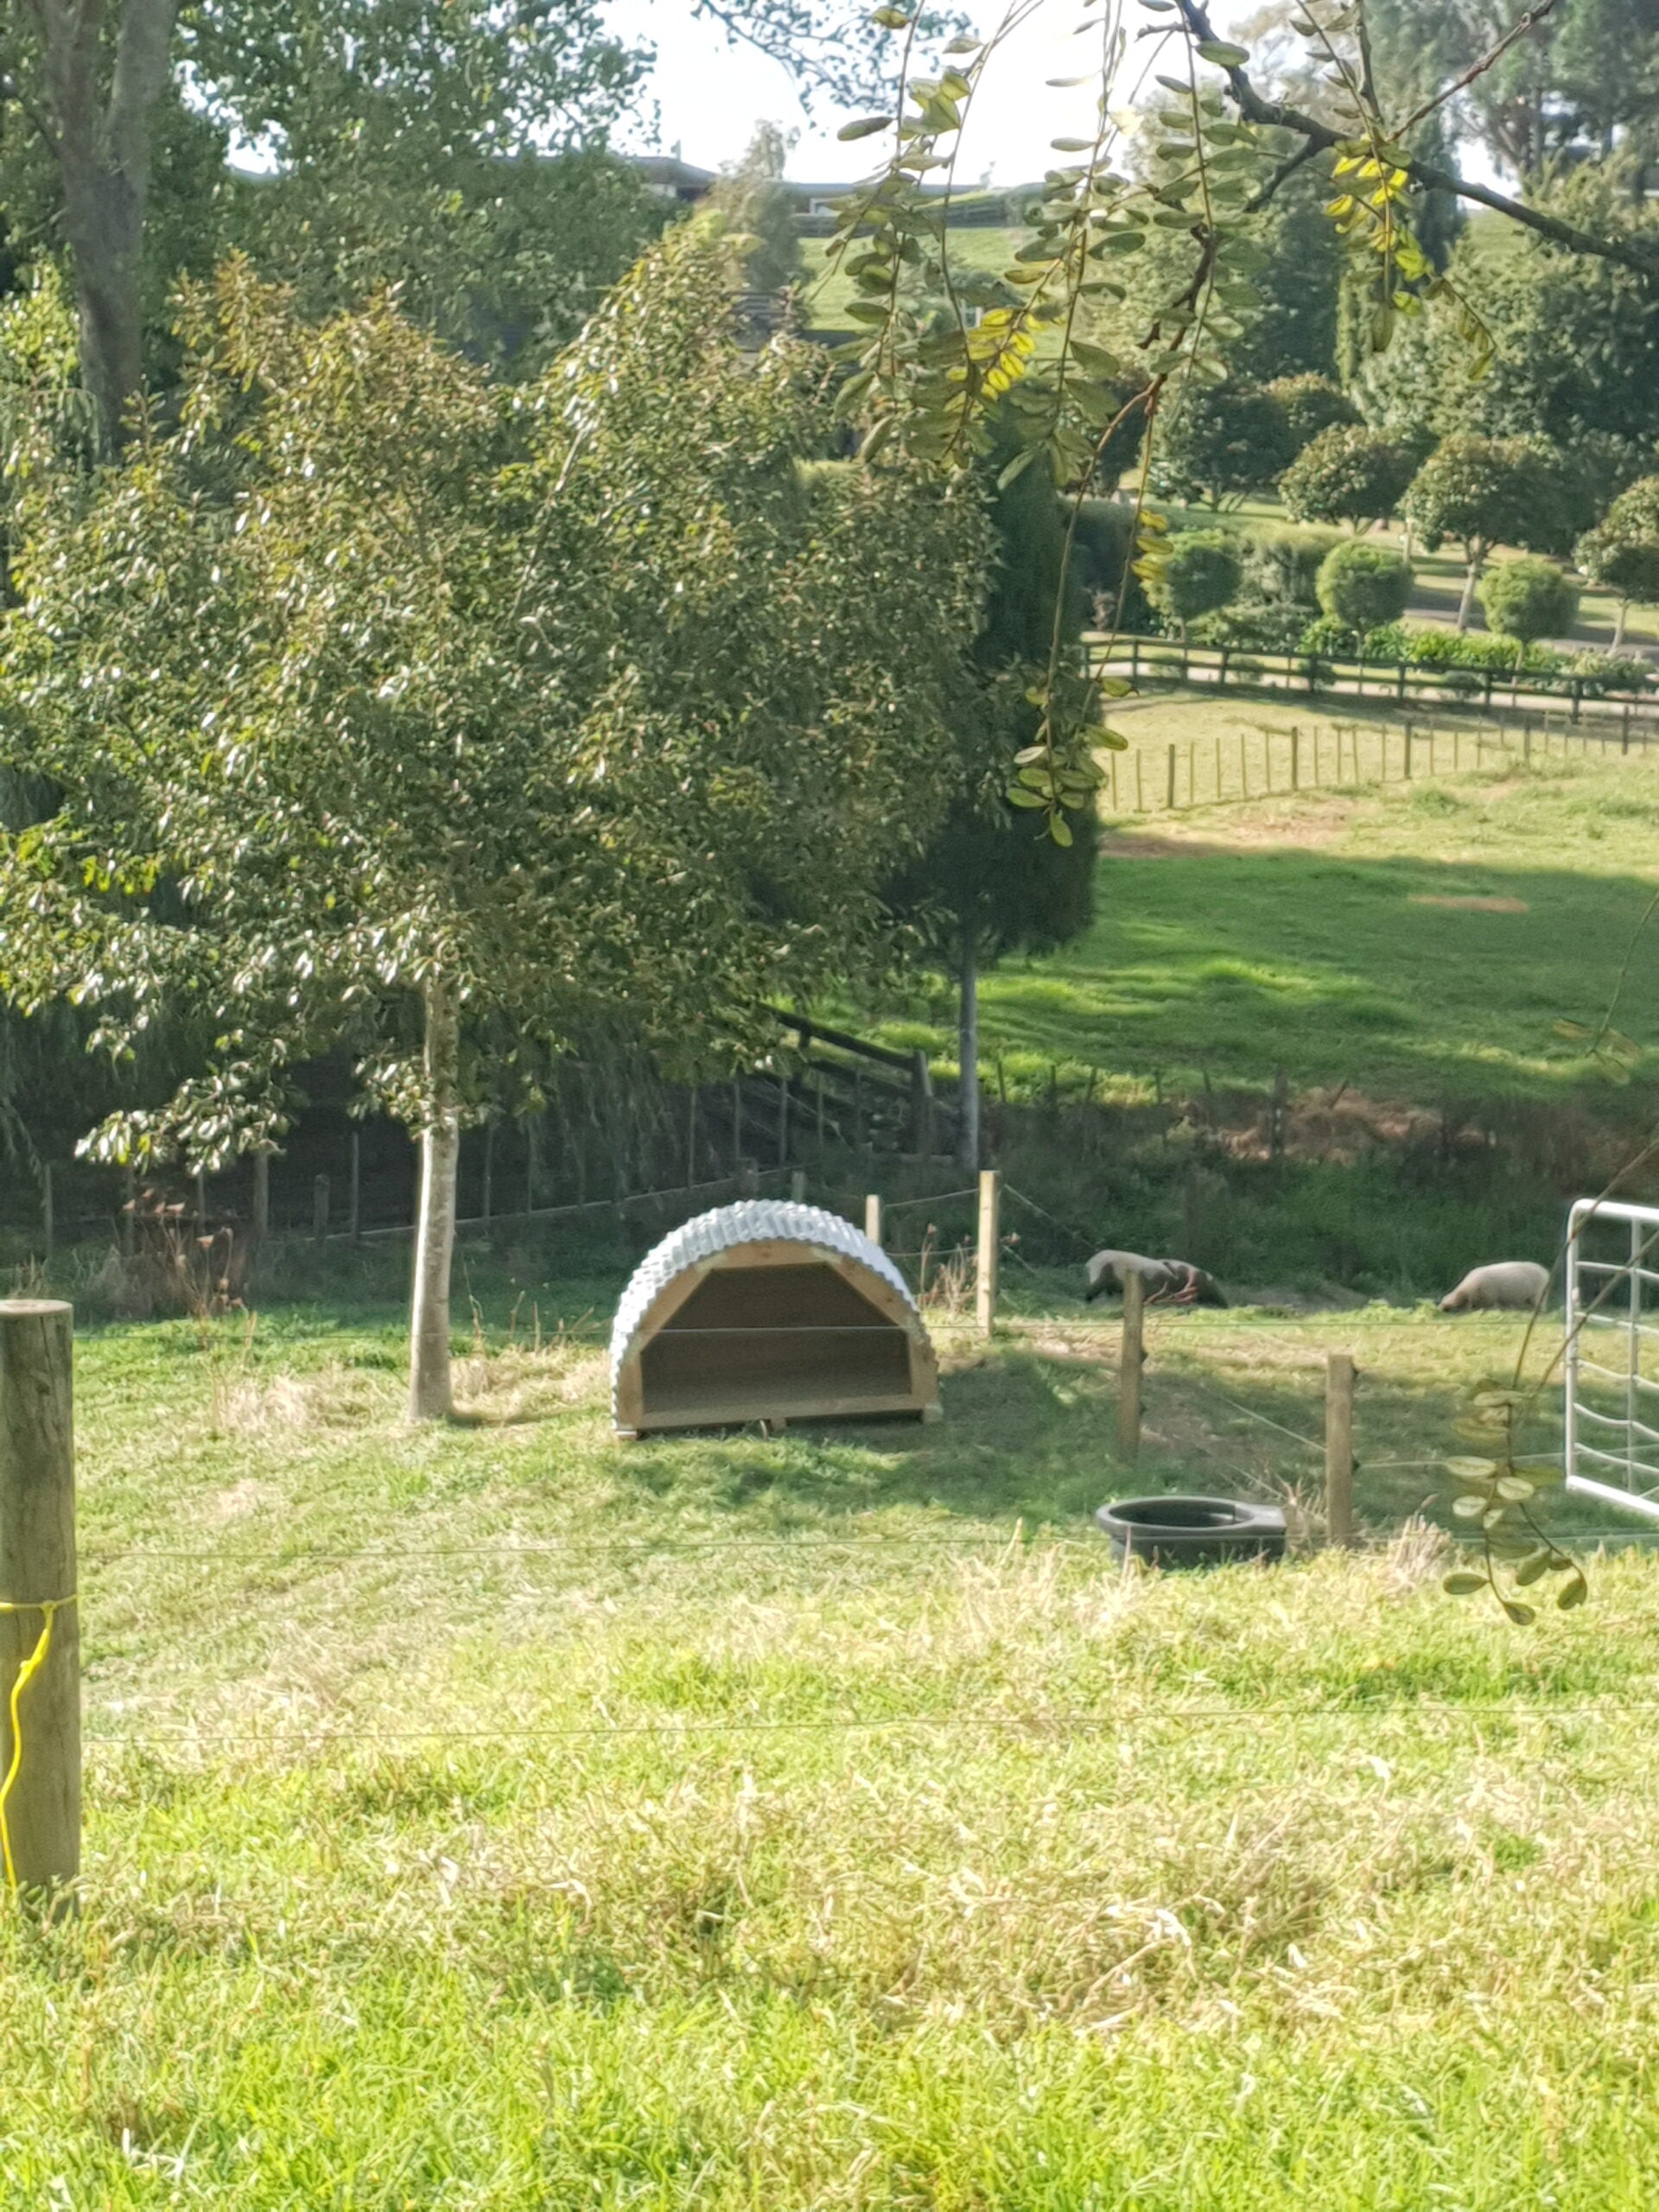 Animal shelter for sale in NZ | suitable for large dogs, pigs, lambs and calves | Round wooden shelter with corrugate iron roof resting on pine skids in a green pasture | For sale in Auckland, Waikato and the North Island New Zeland